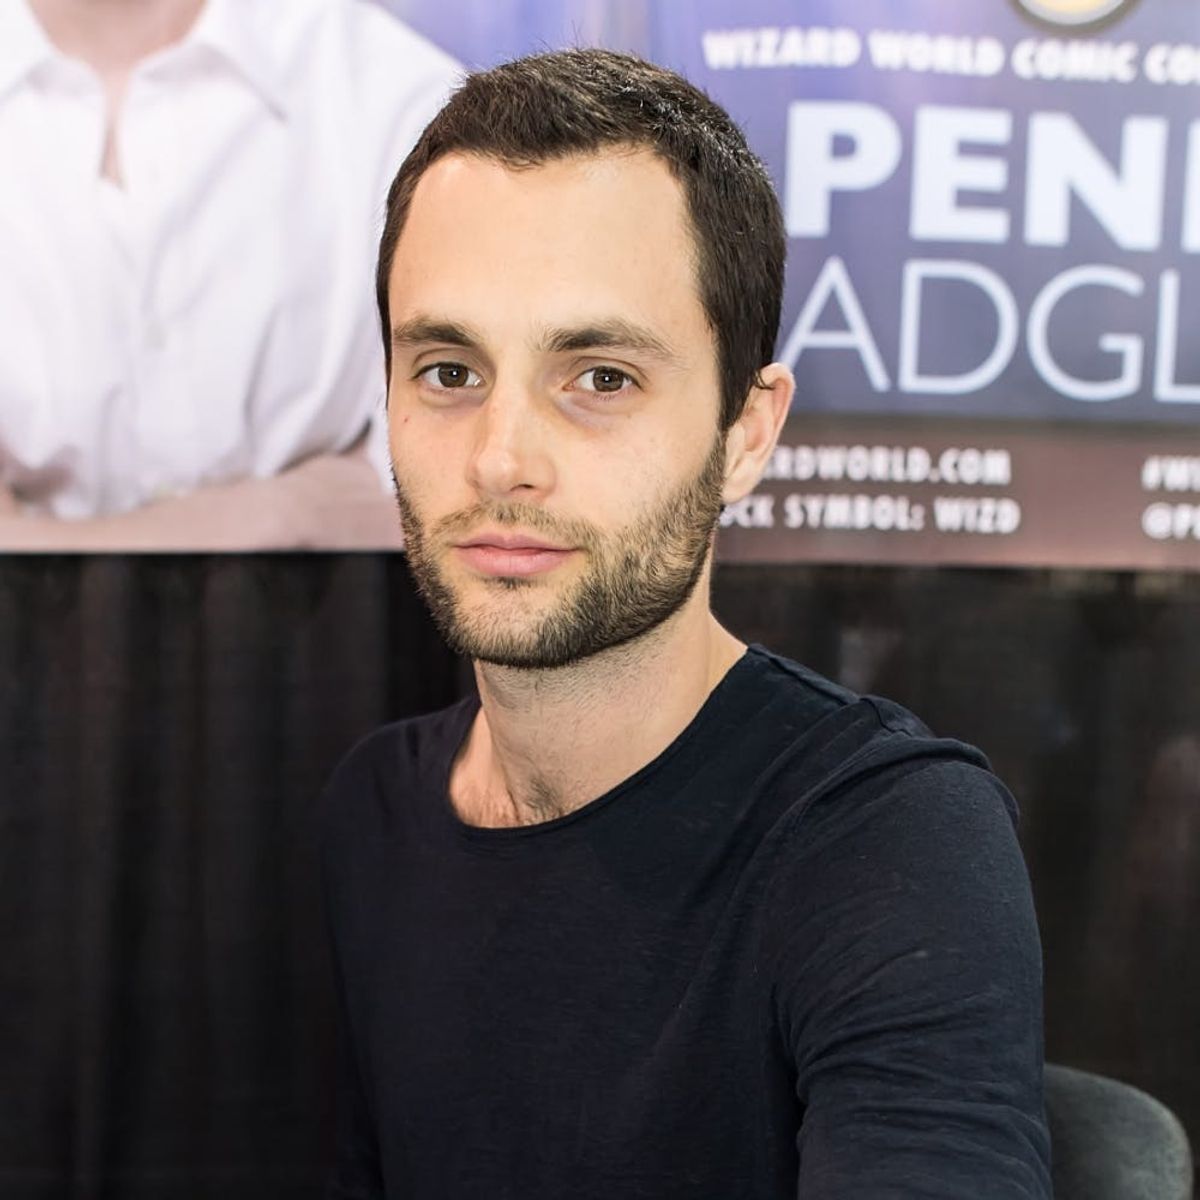 Gossip Girl’s Penn Badgley Just Debuted a Totally New Look